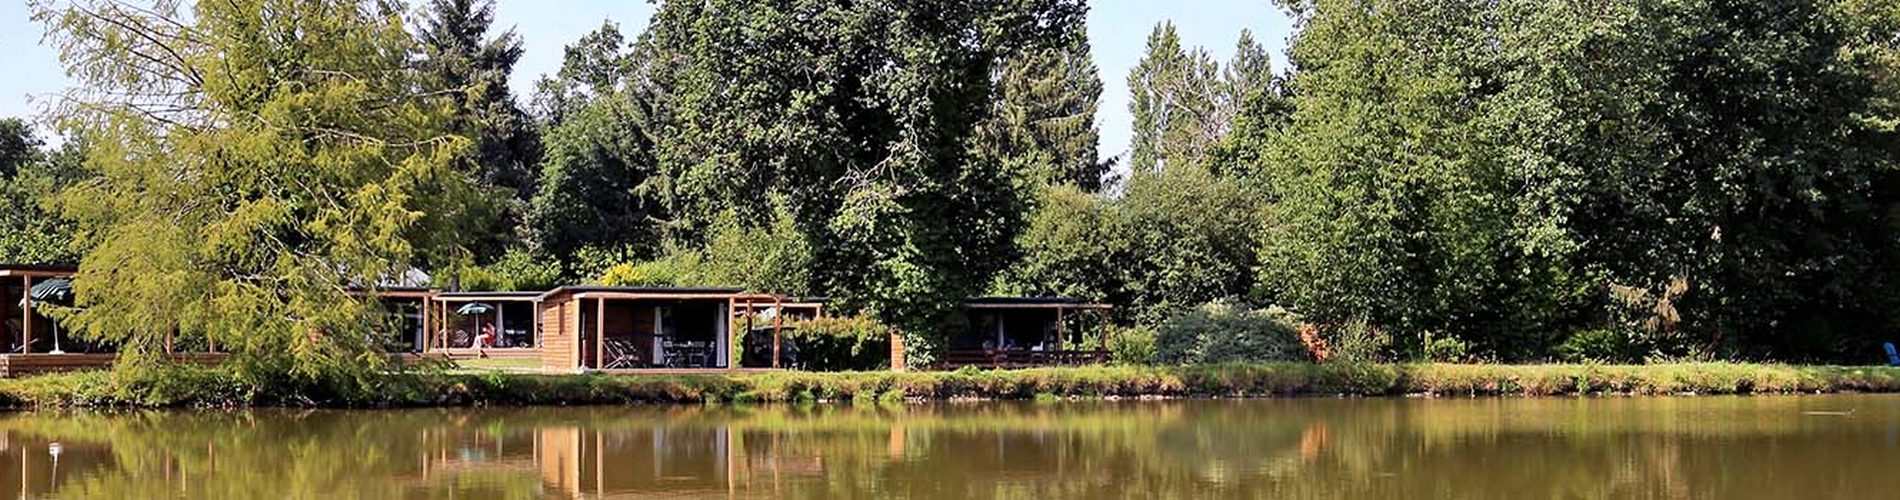 huttopia-camping-lac-de-luby-hebergements-header